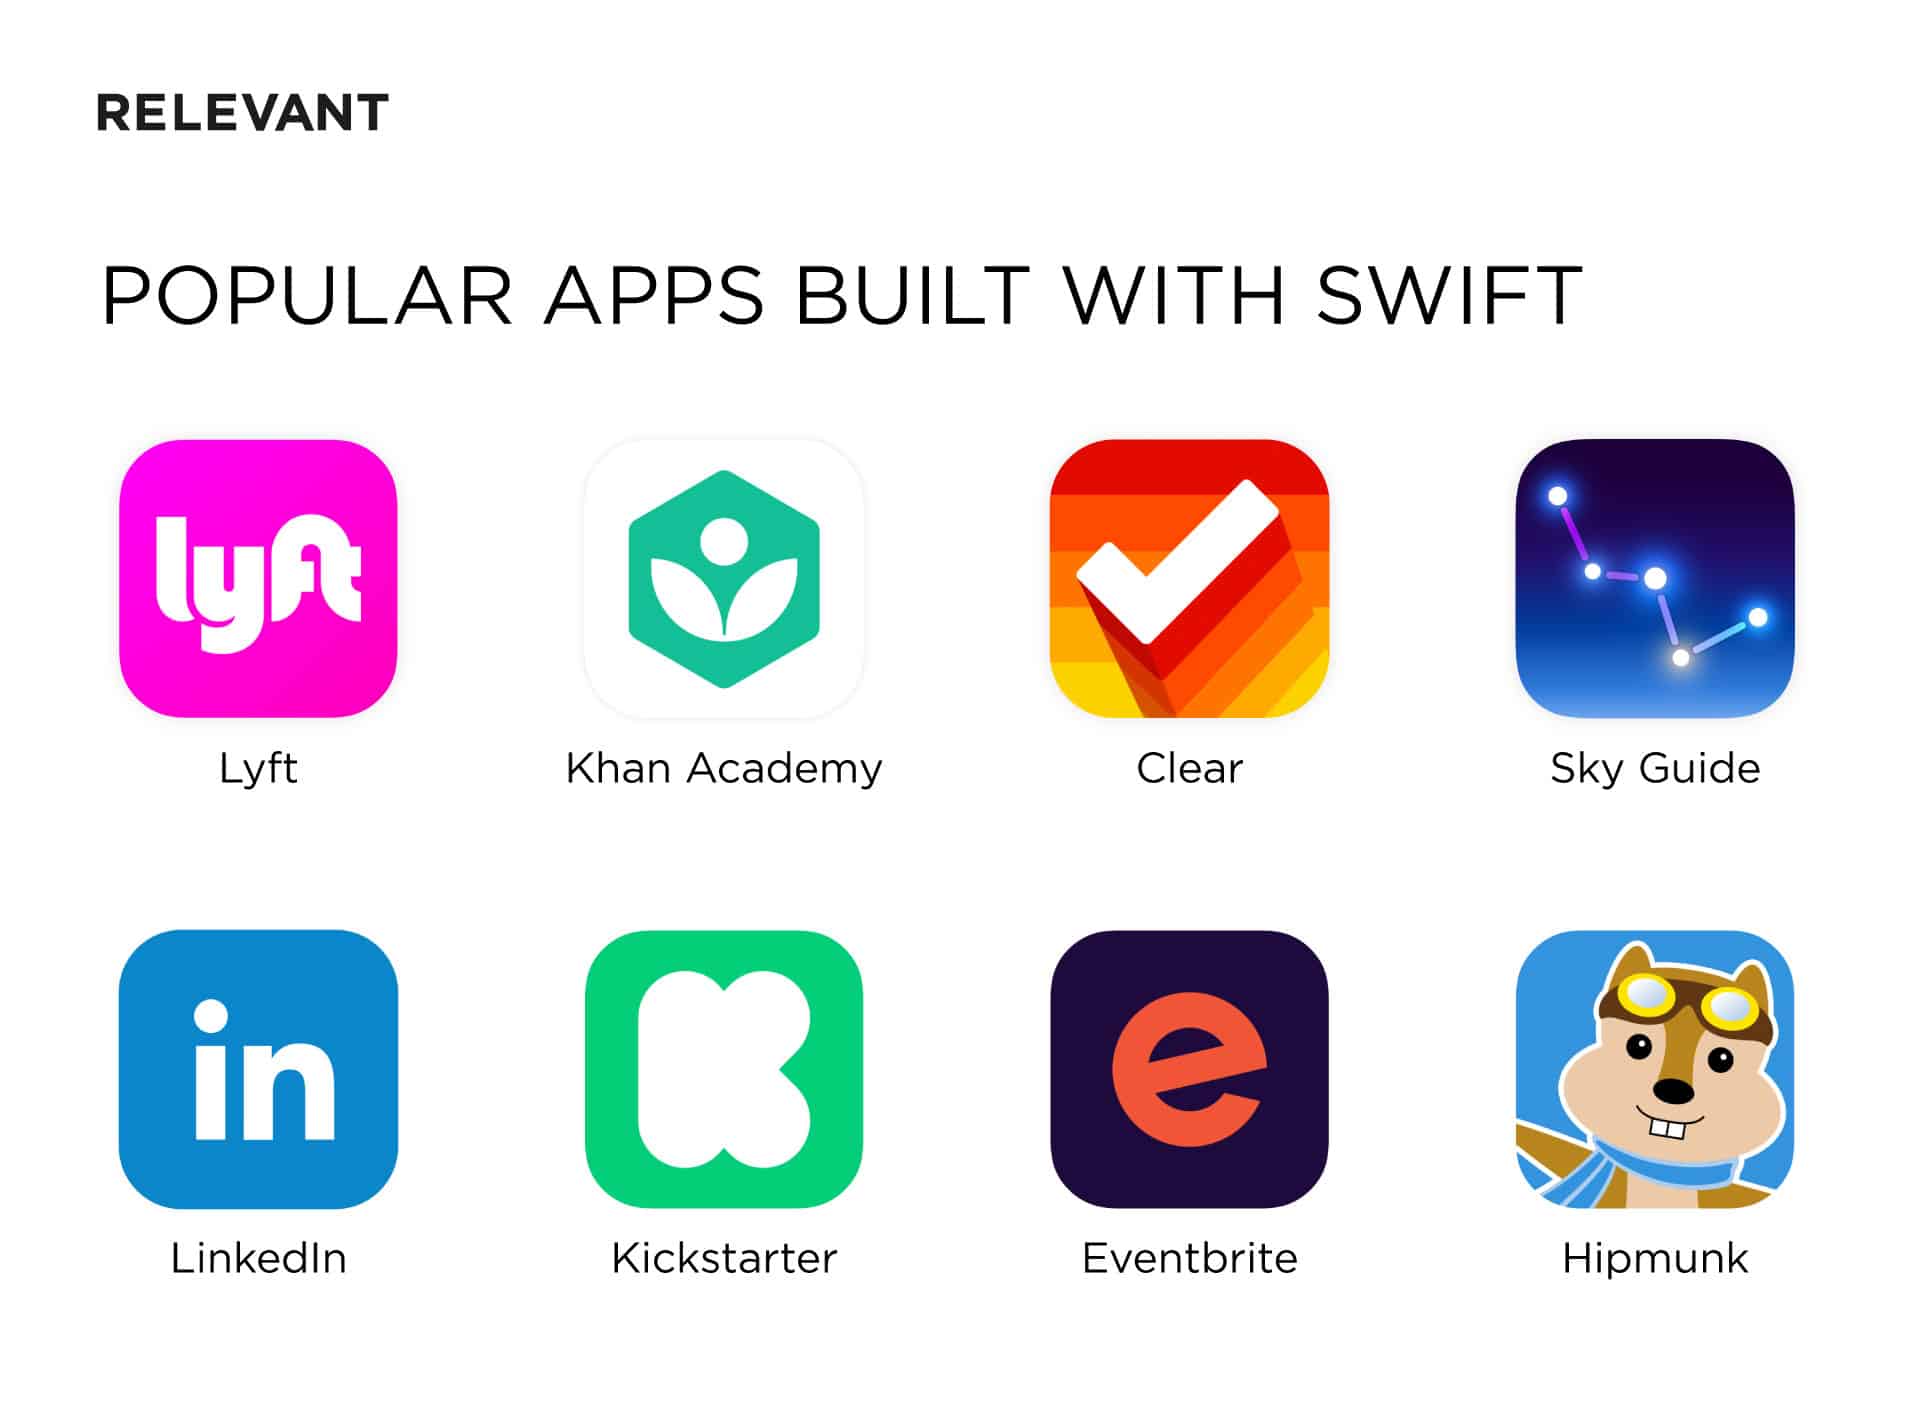 Popular apps built with Swift - Swift for ios development